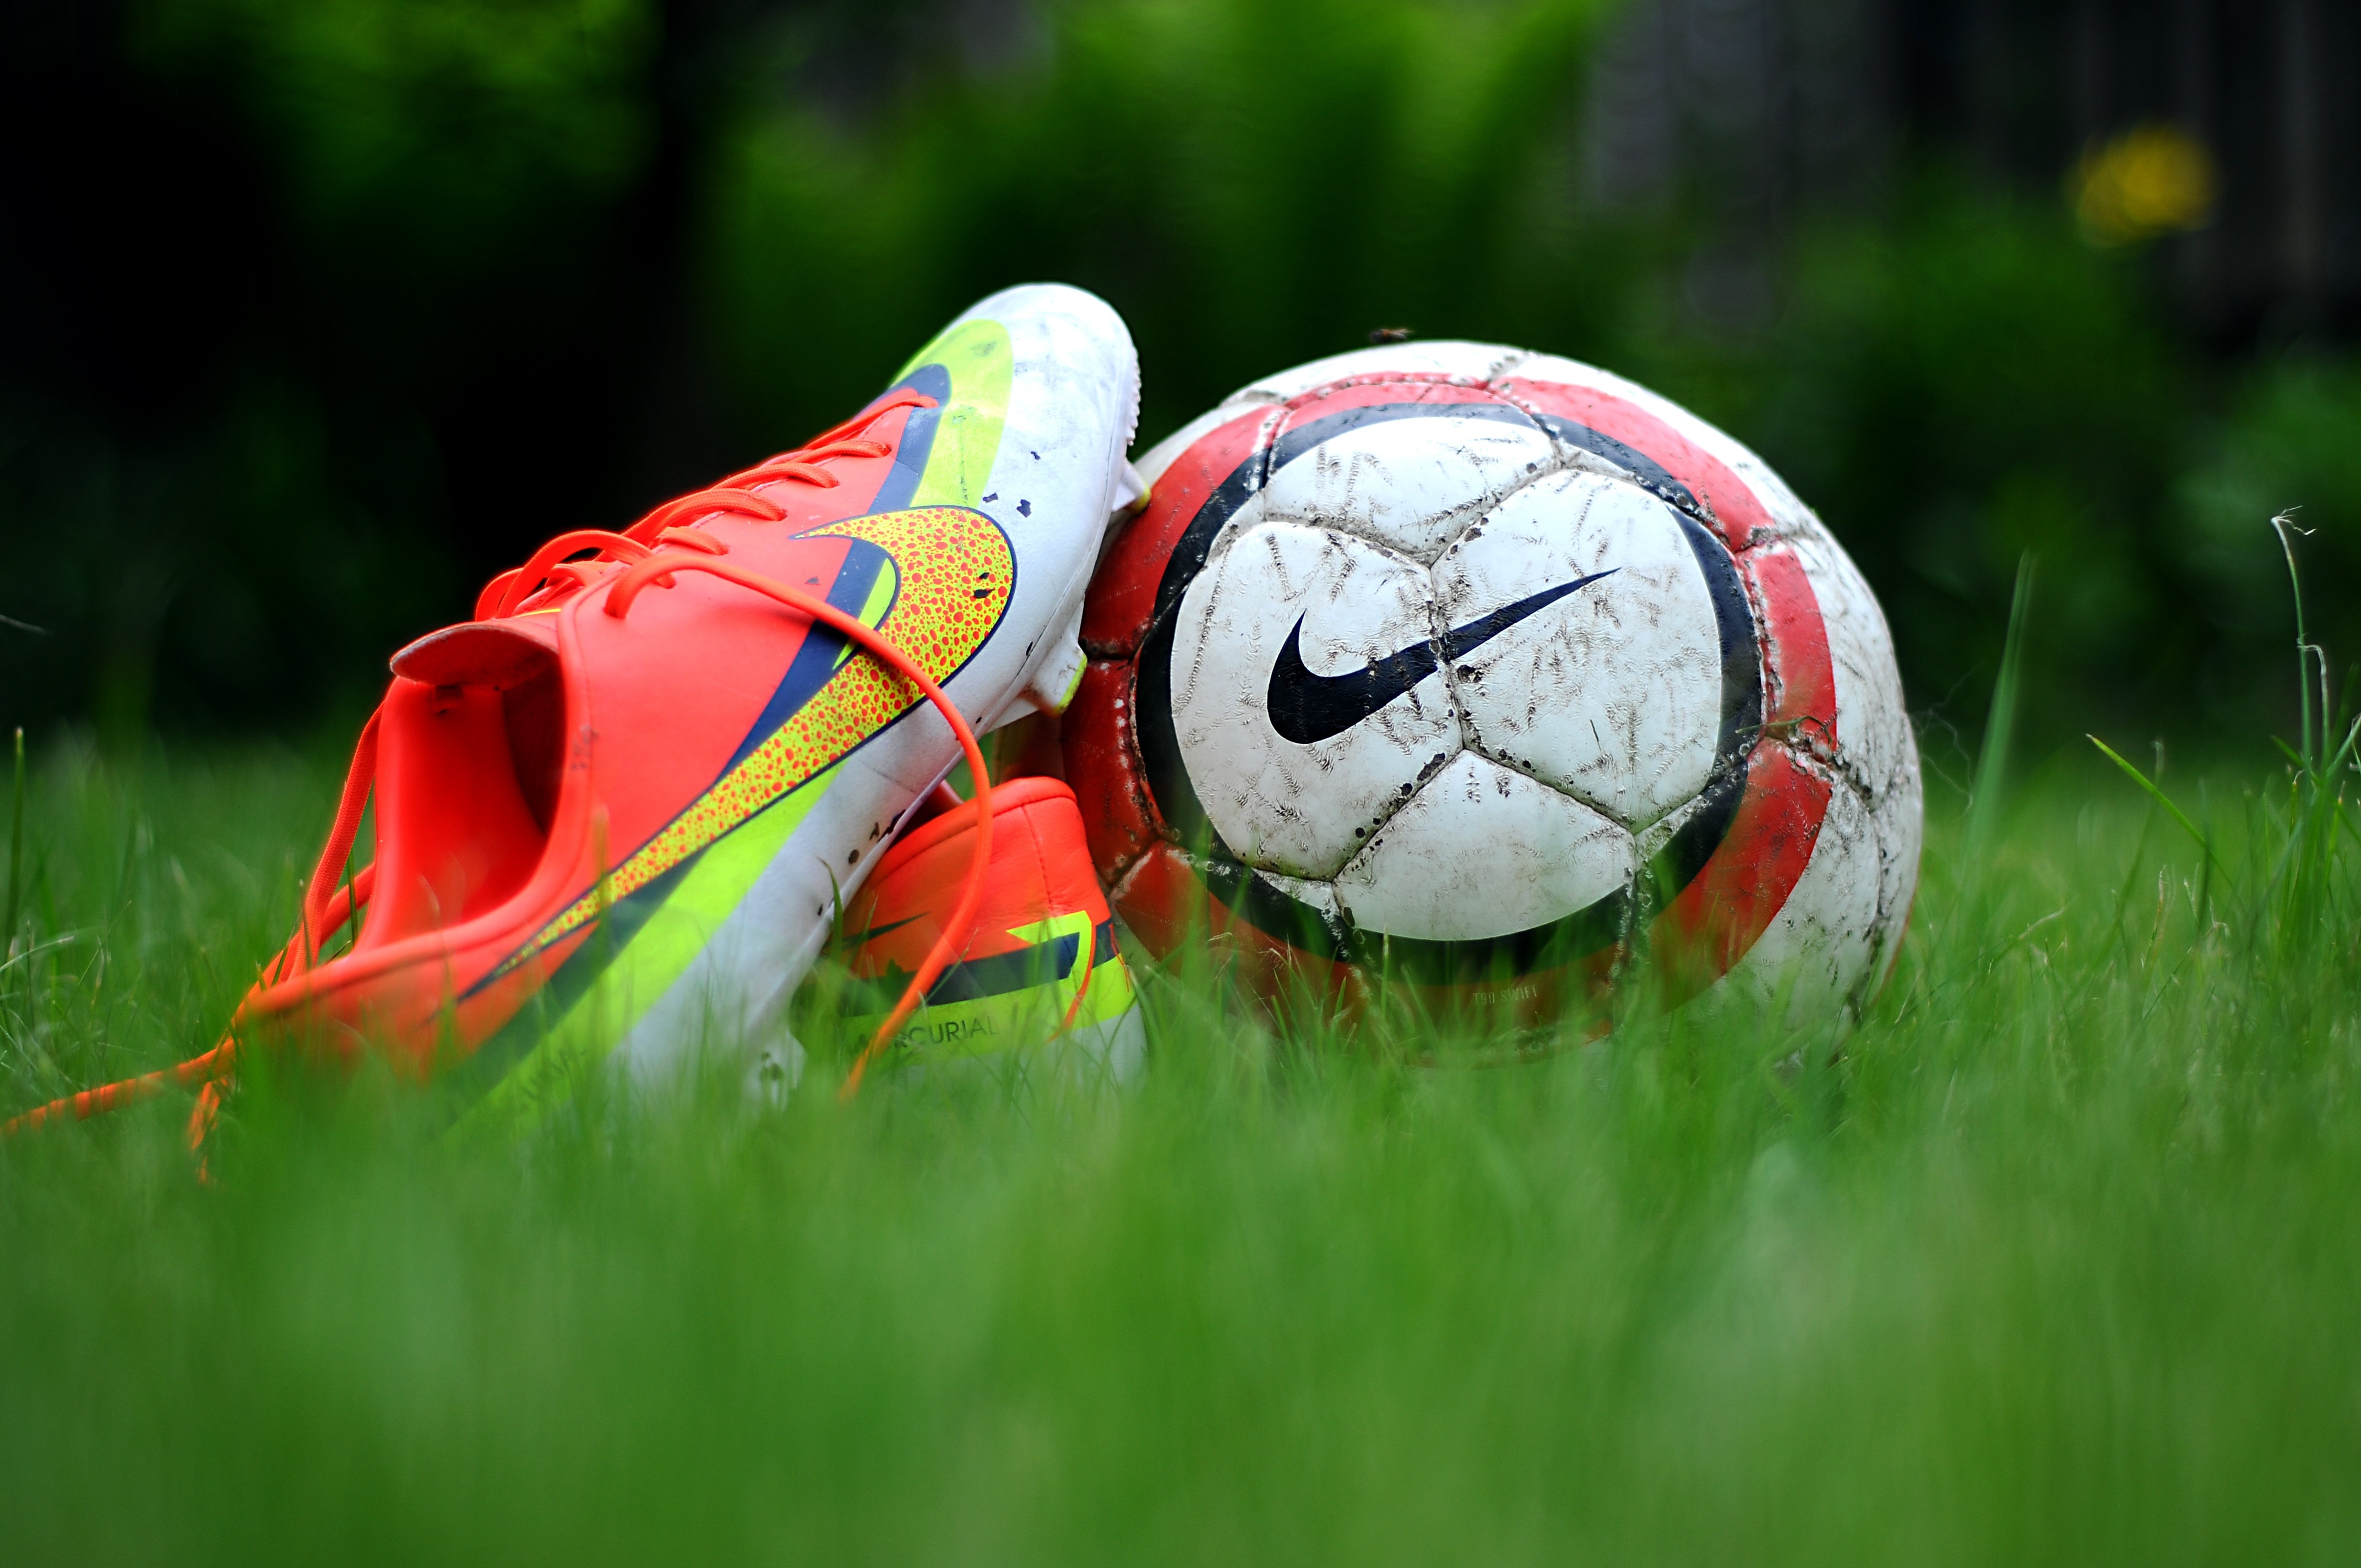 Close Up Photography Of Nike Soccer Cleats And Ball On